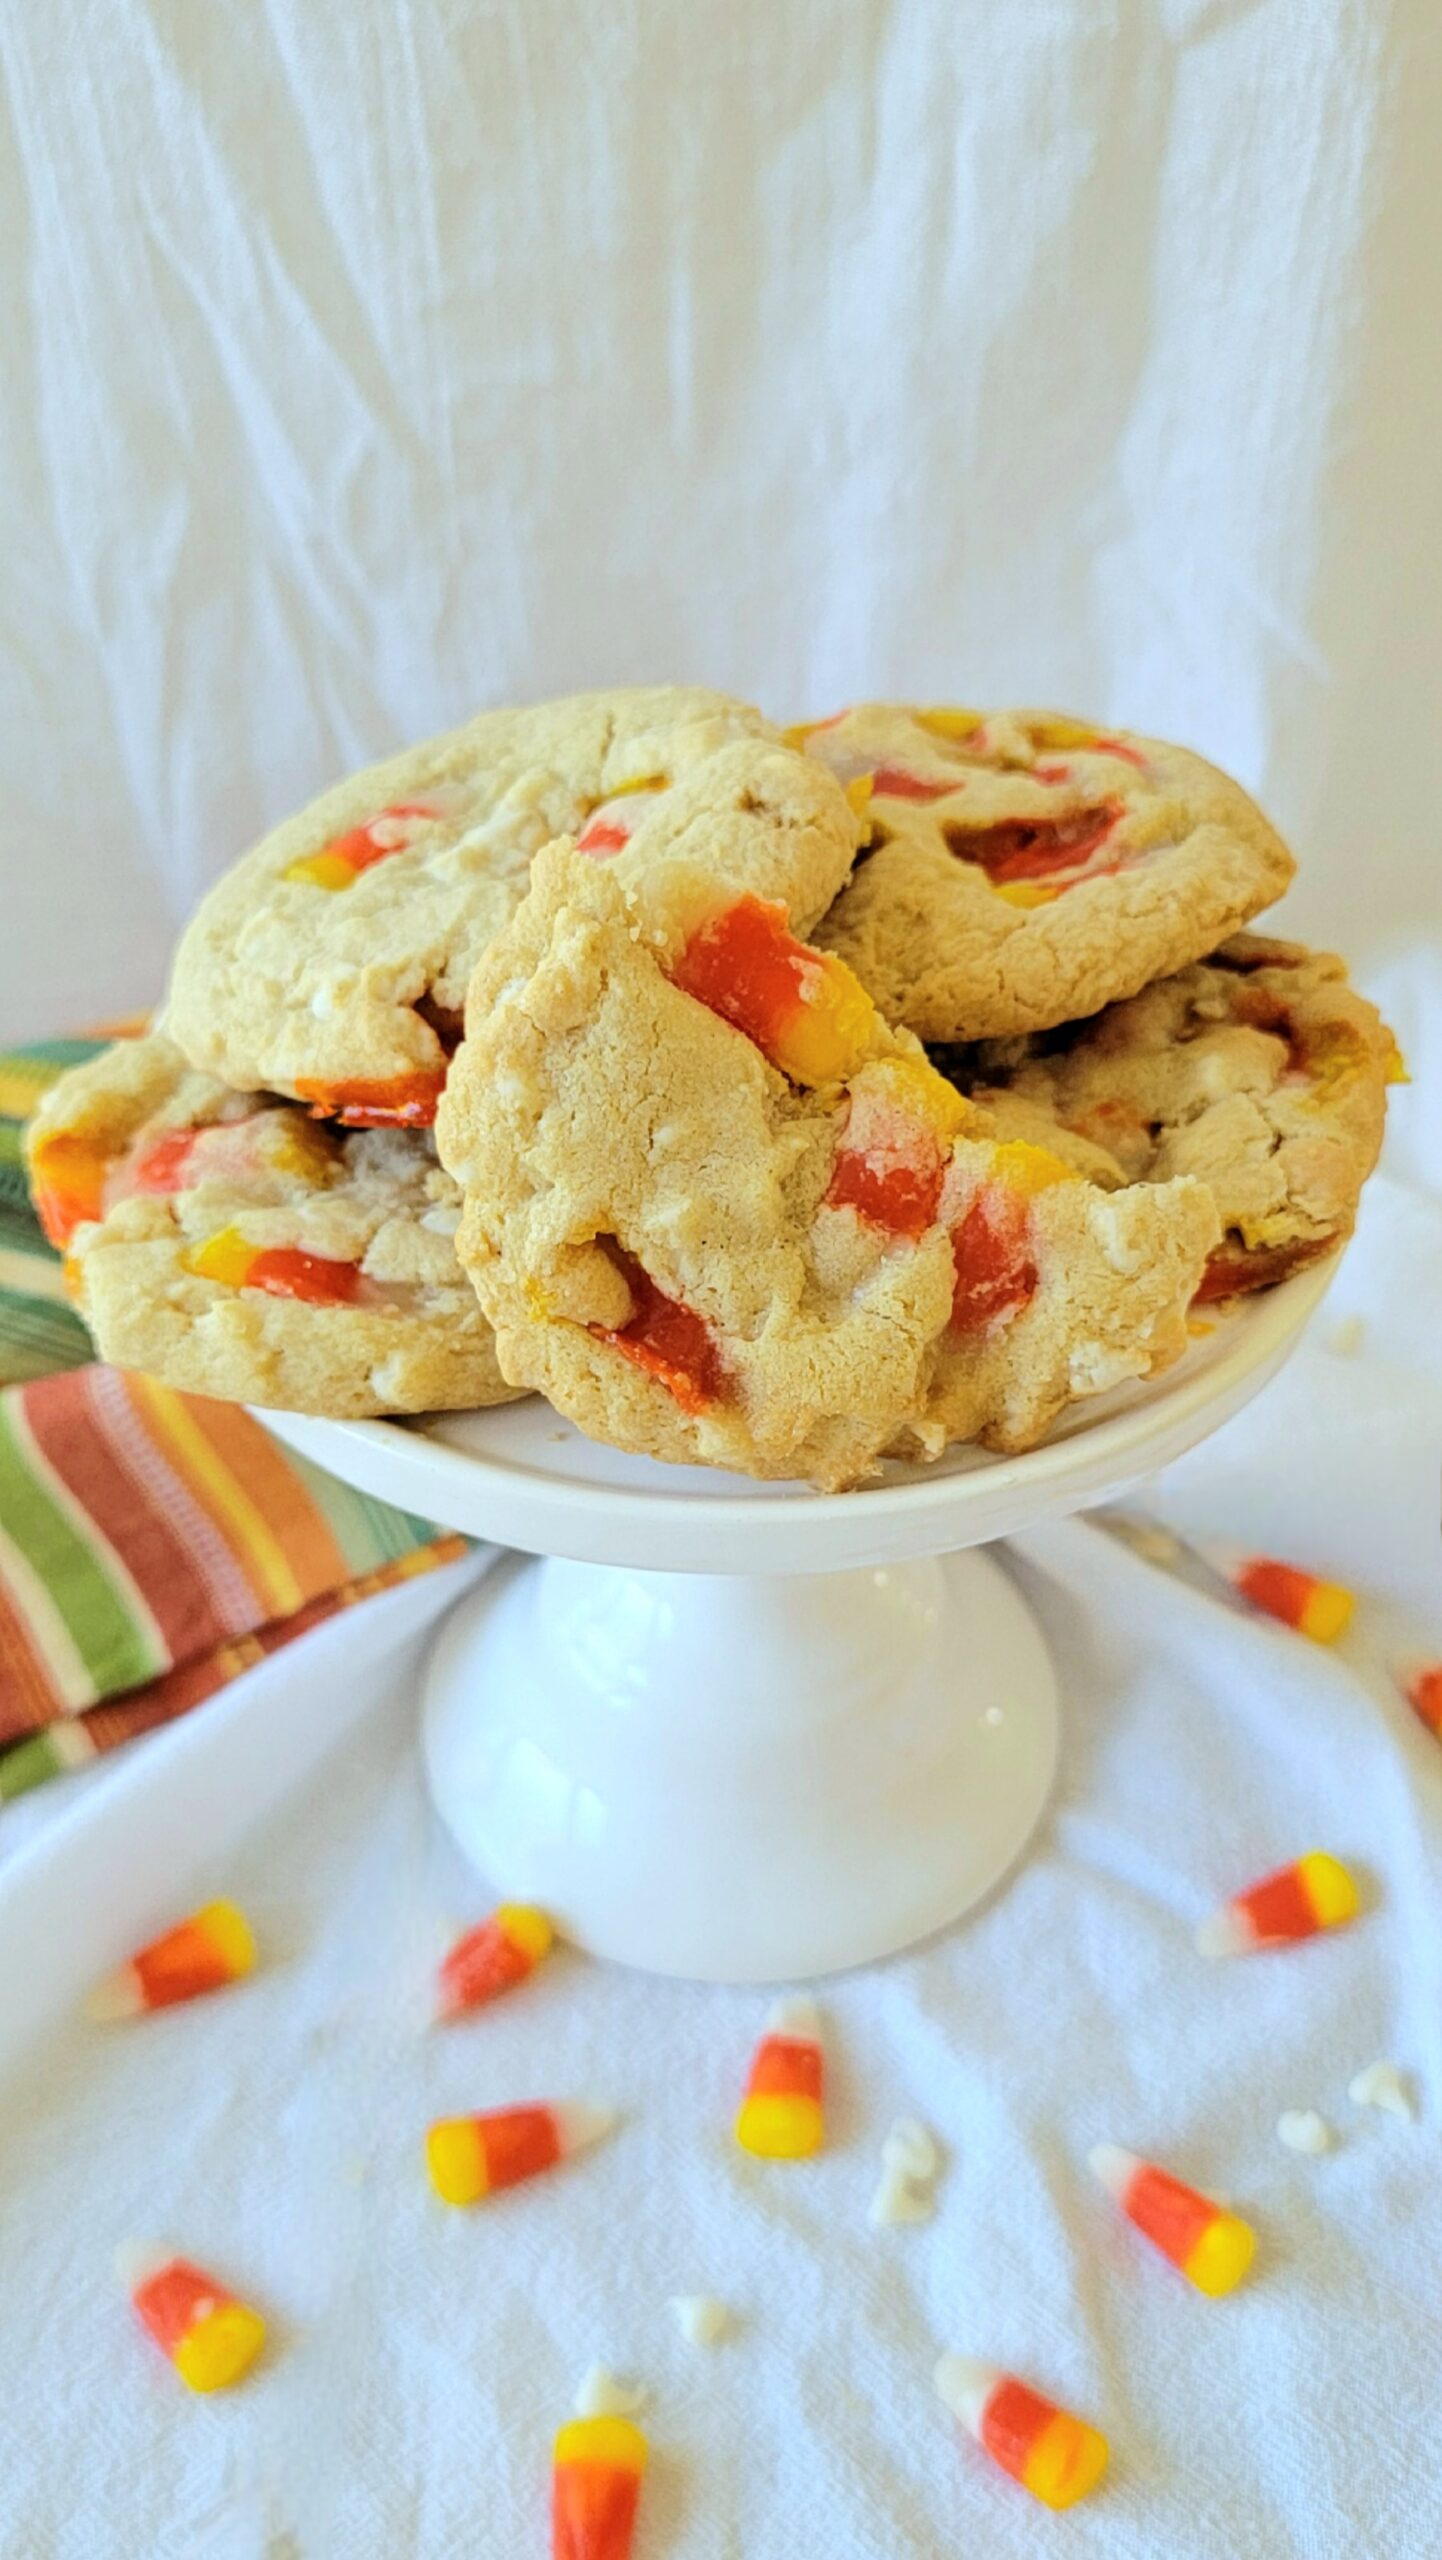 Candy Corn and White Chocolate Chip Cookies